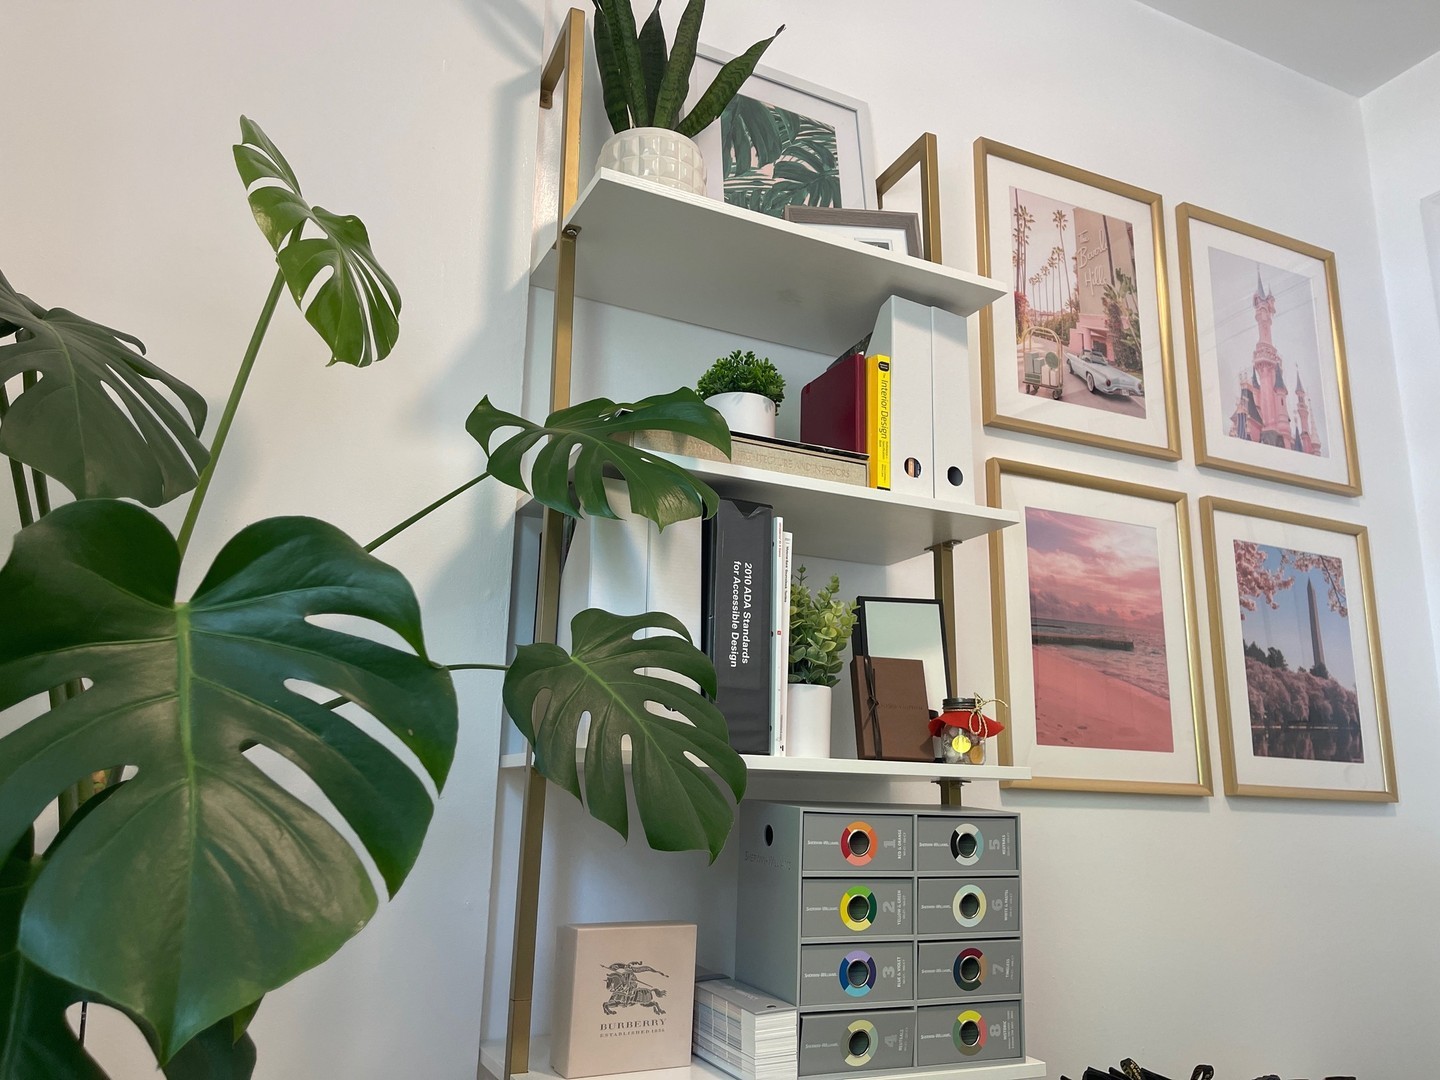 Connor, one of our designers, is certainly channeling chic summer vibes in his home office. Is it time for the beach yet?